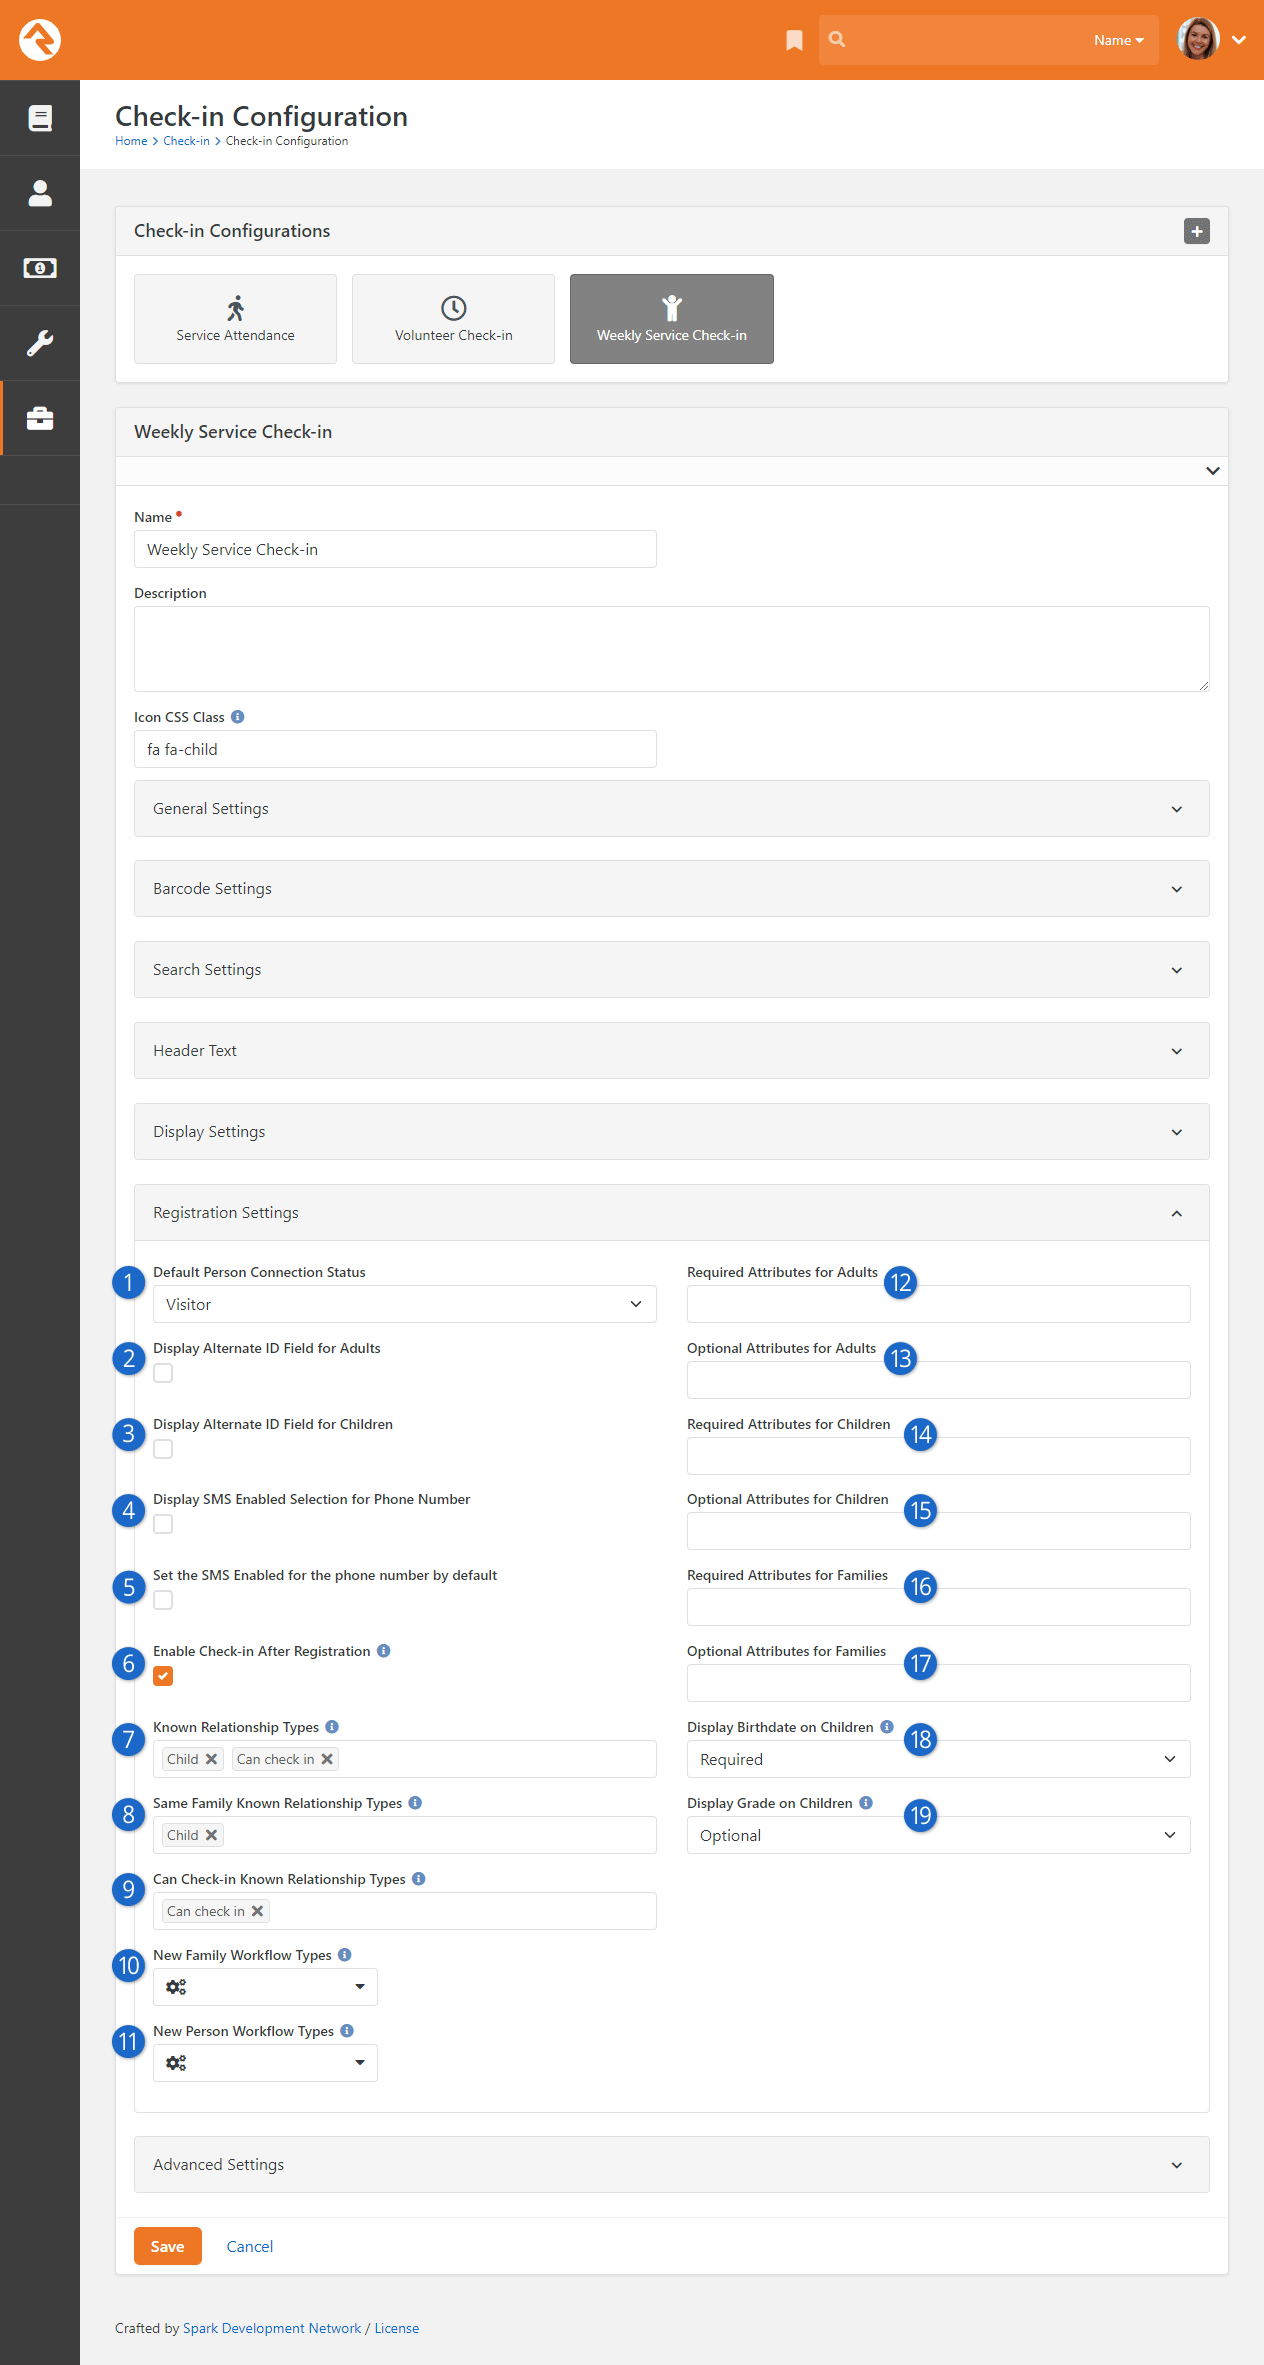 Check-in Registration Settings